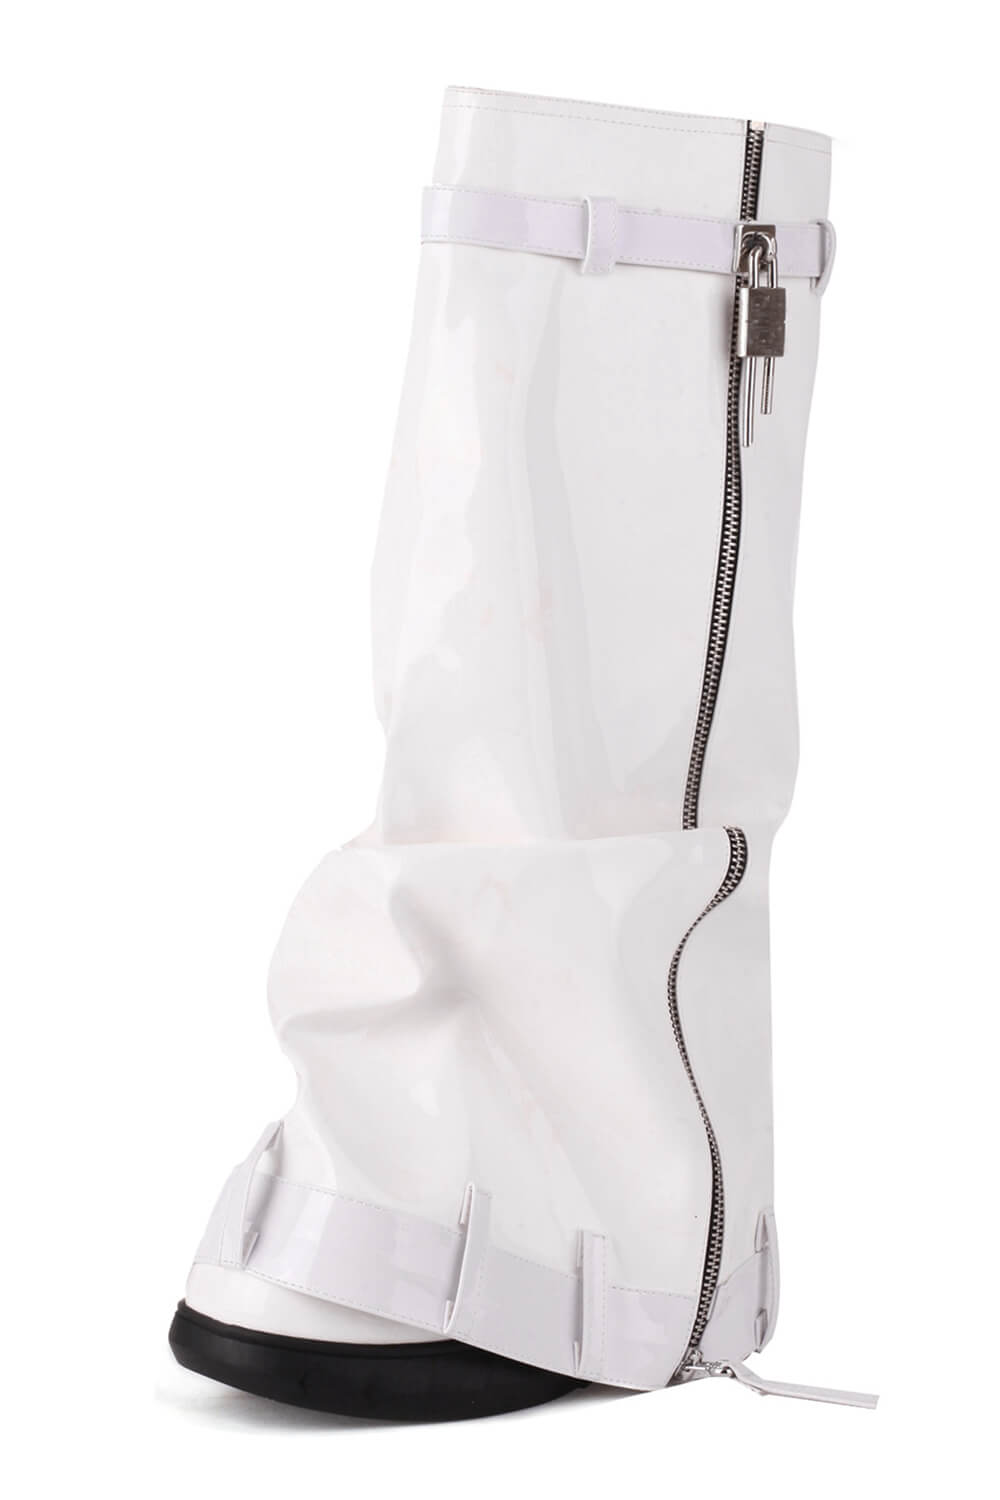 Patent Wrapped Padlock Zip Detail Folded Knee High Wedge Chunky Biker Boots - White